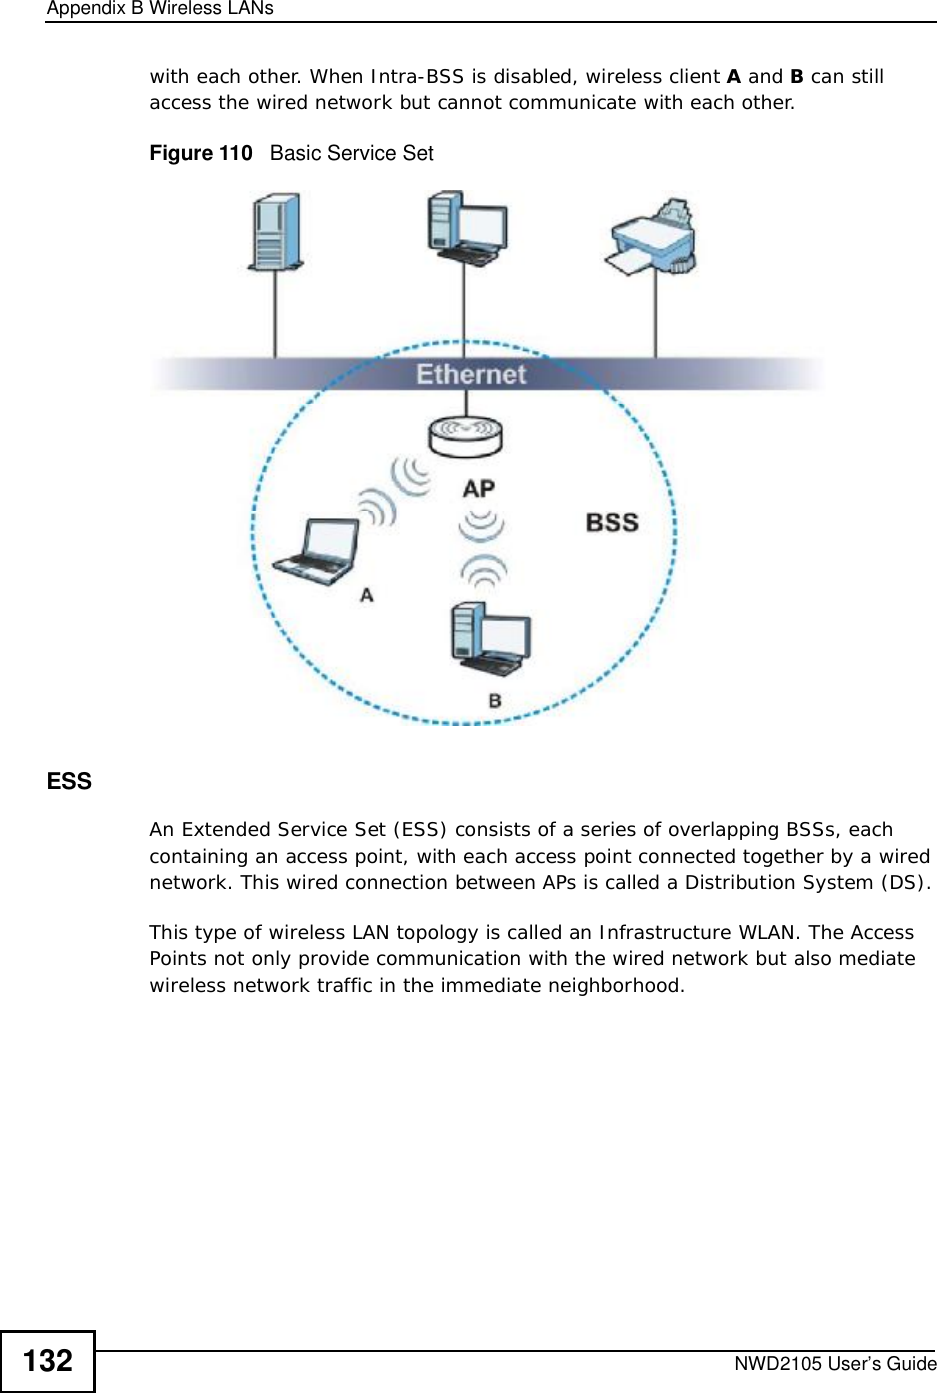 Appendix BWireless LANsNWD2105 User’s Guide132with each other. When Intra-BSS is disabled, wireless client A and B can still access the wired network but cannot communicate with each other.Figure 110   Basic Service SetESSAn Extended Service Set (ESS) consists of a series of overlapping BSSs, each containing an access point, with each access point connected together by a wired network. This wired connection between APs is called a Distribution System (DS).This type of wireless LAN topology is called an Infrastructure WLAN. The Access Points not only provide communication with the wired network but also mediate wireless network traffic in the immediate neighborhood. 